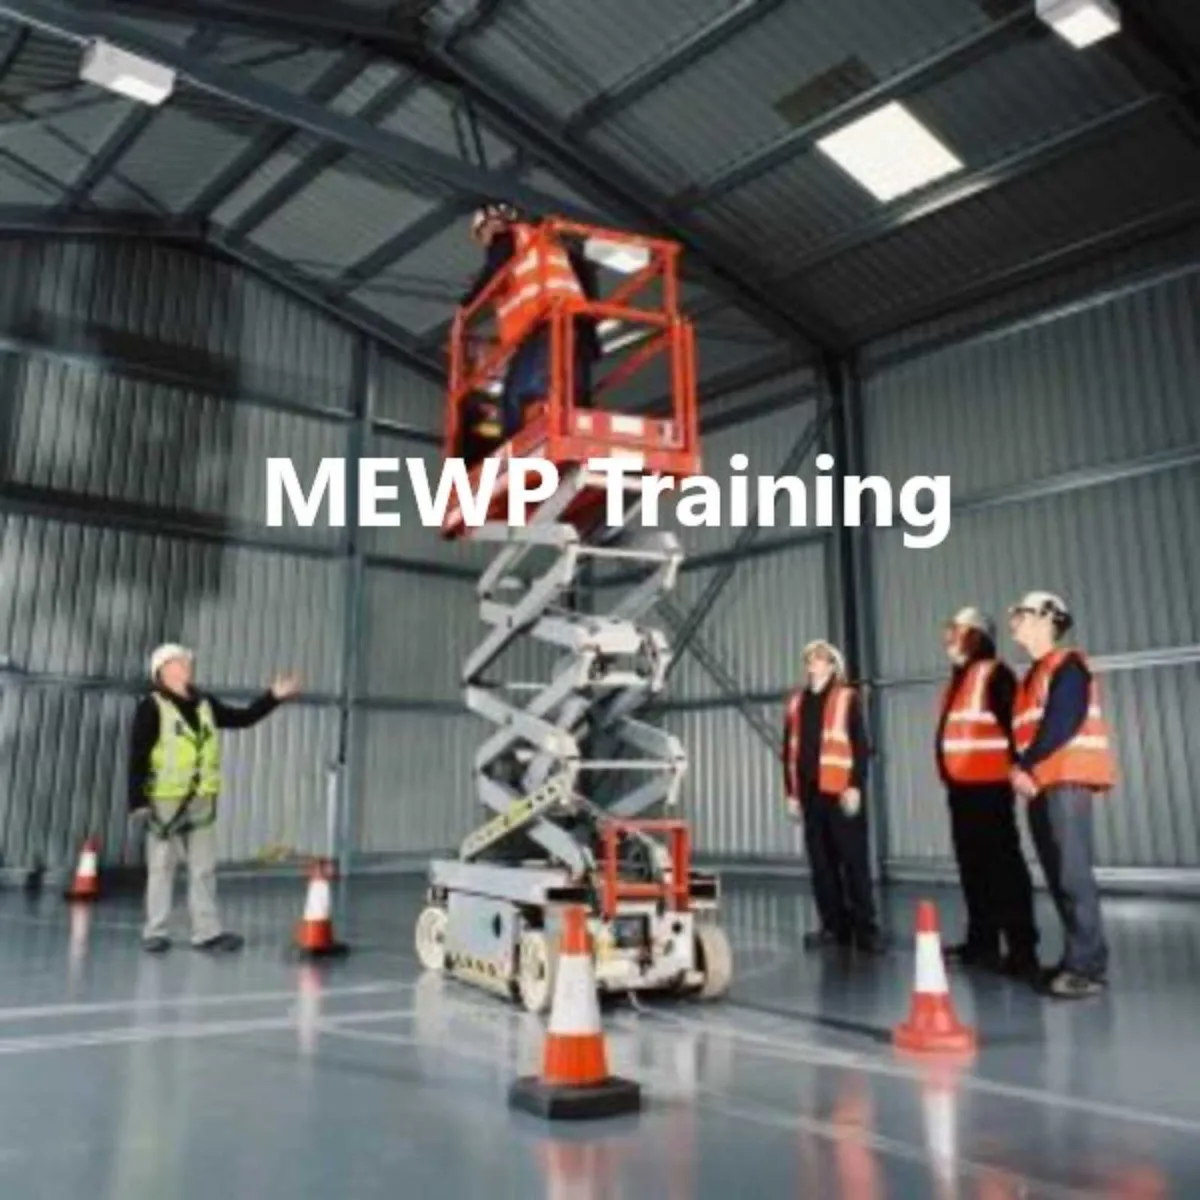 Online MEWP Training with Cherry Picker - Image 1